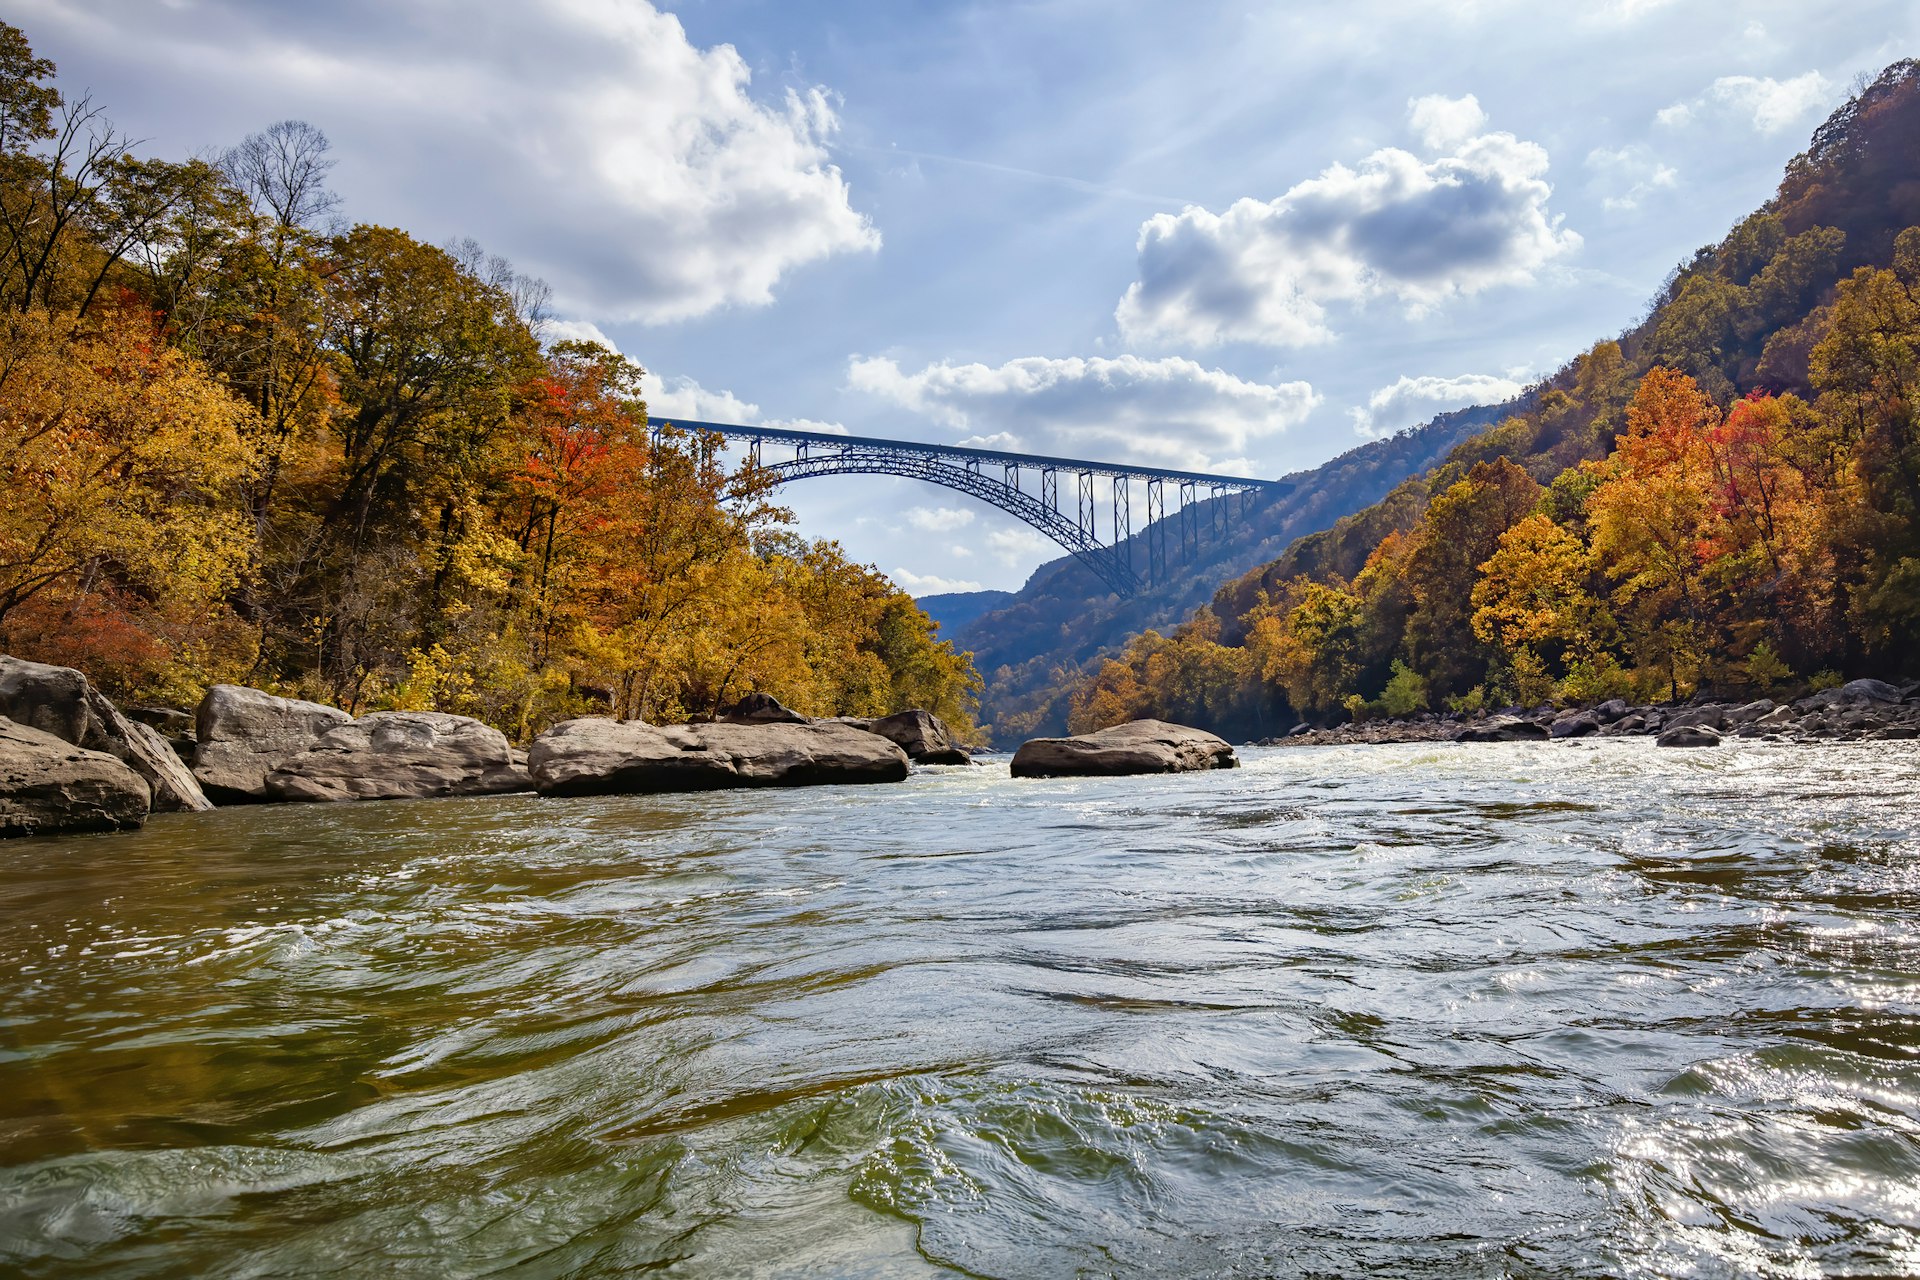 Autumn Colors in West Virginia, a suspension bridge hangs over the New River Gorge with colorful trees on either side of the river